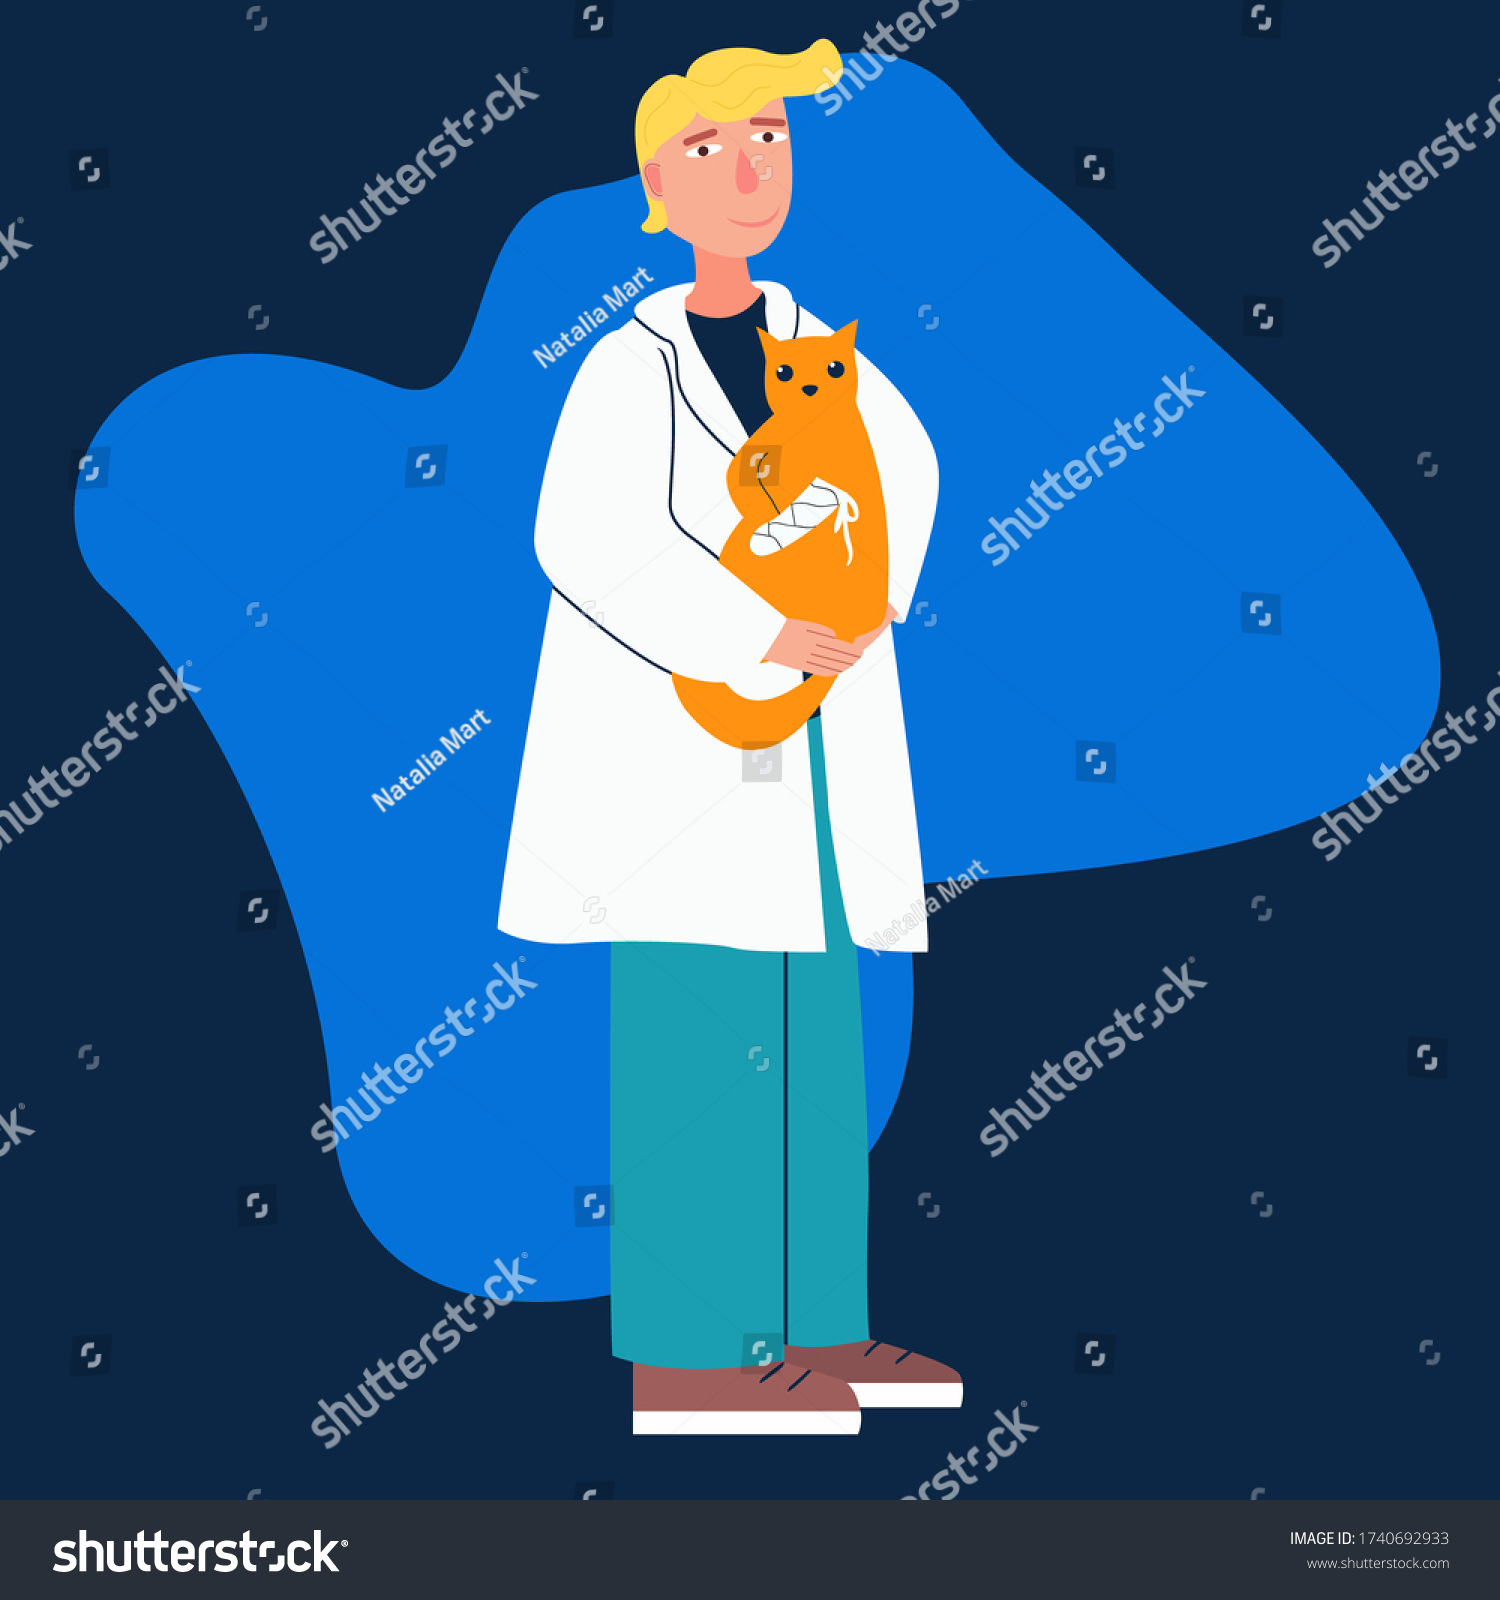 SVG of doctor holding a can with broken paw svg